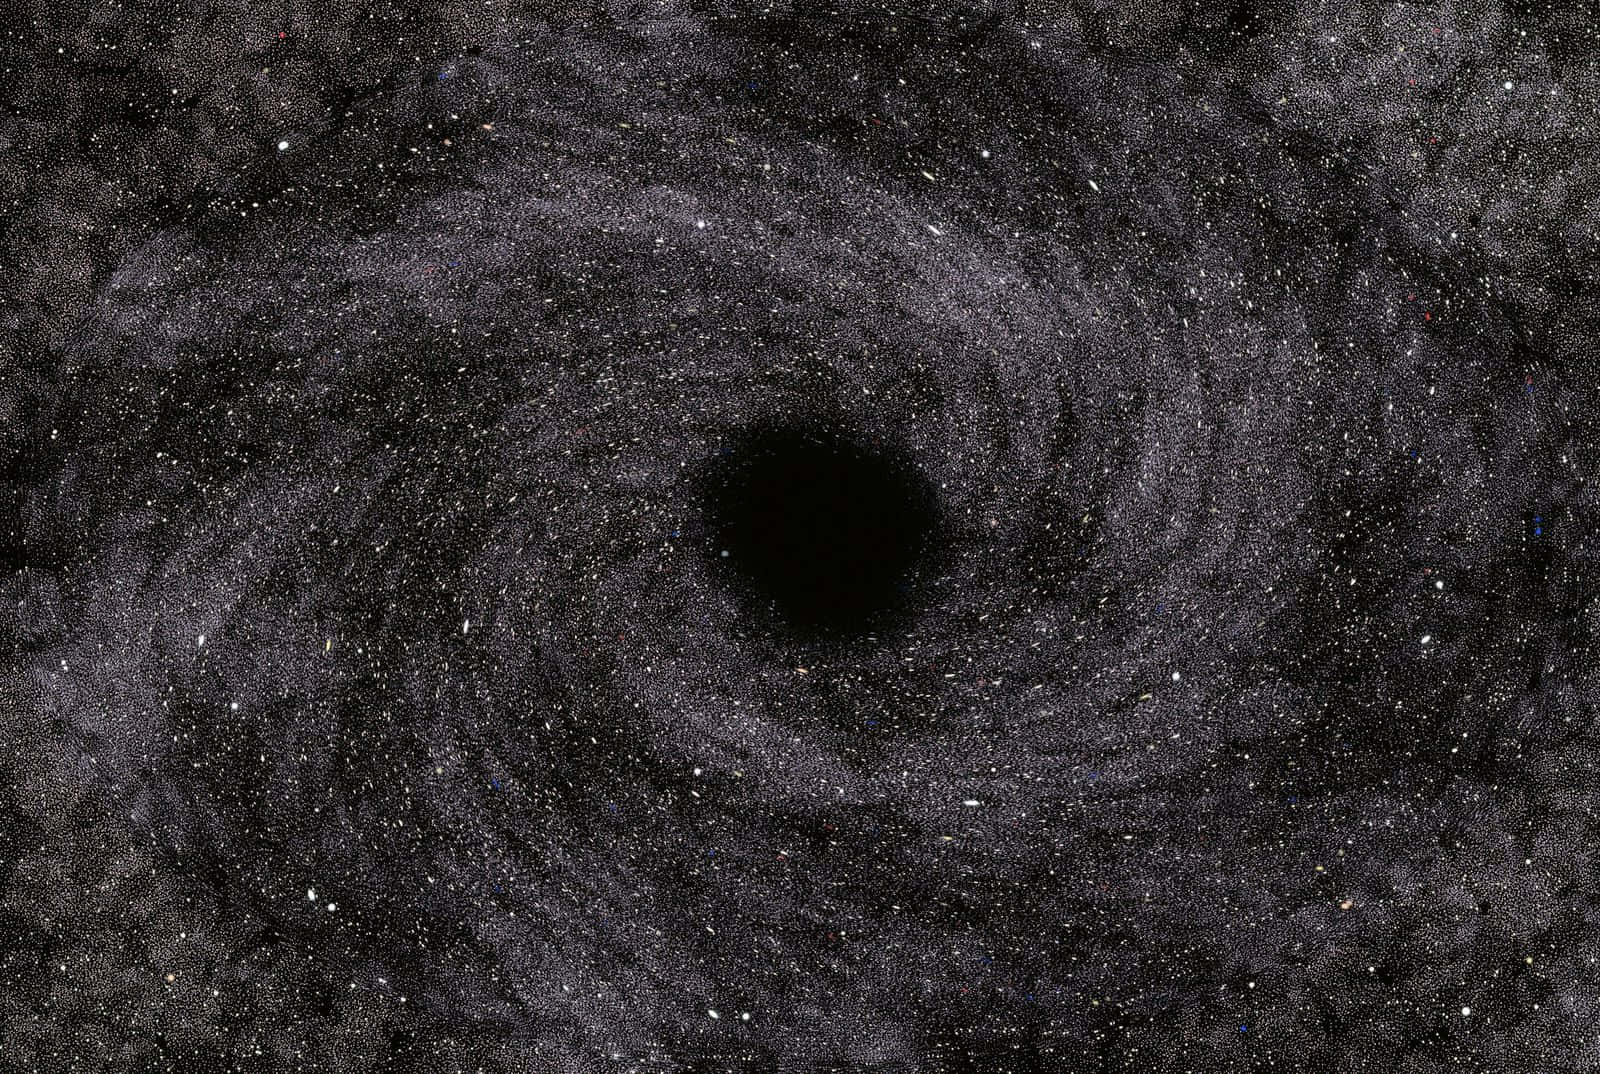 An Artist's Image of a Black Hole Captured By Hubble Telescope